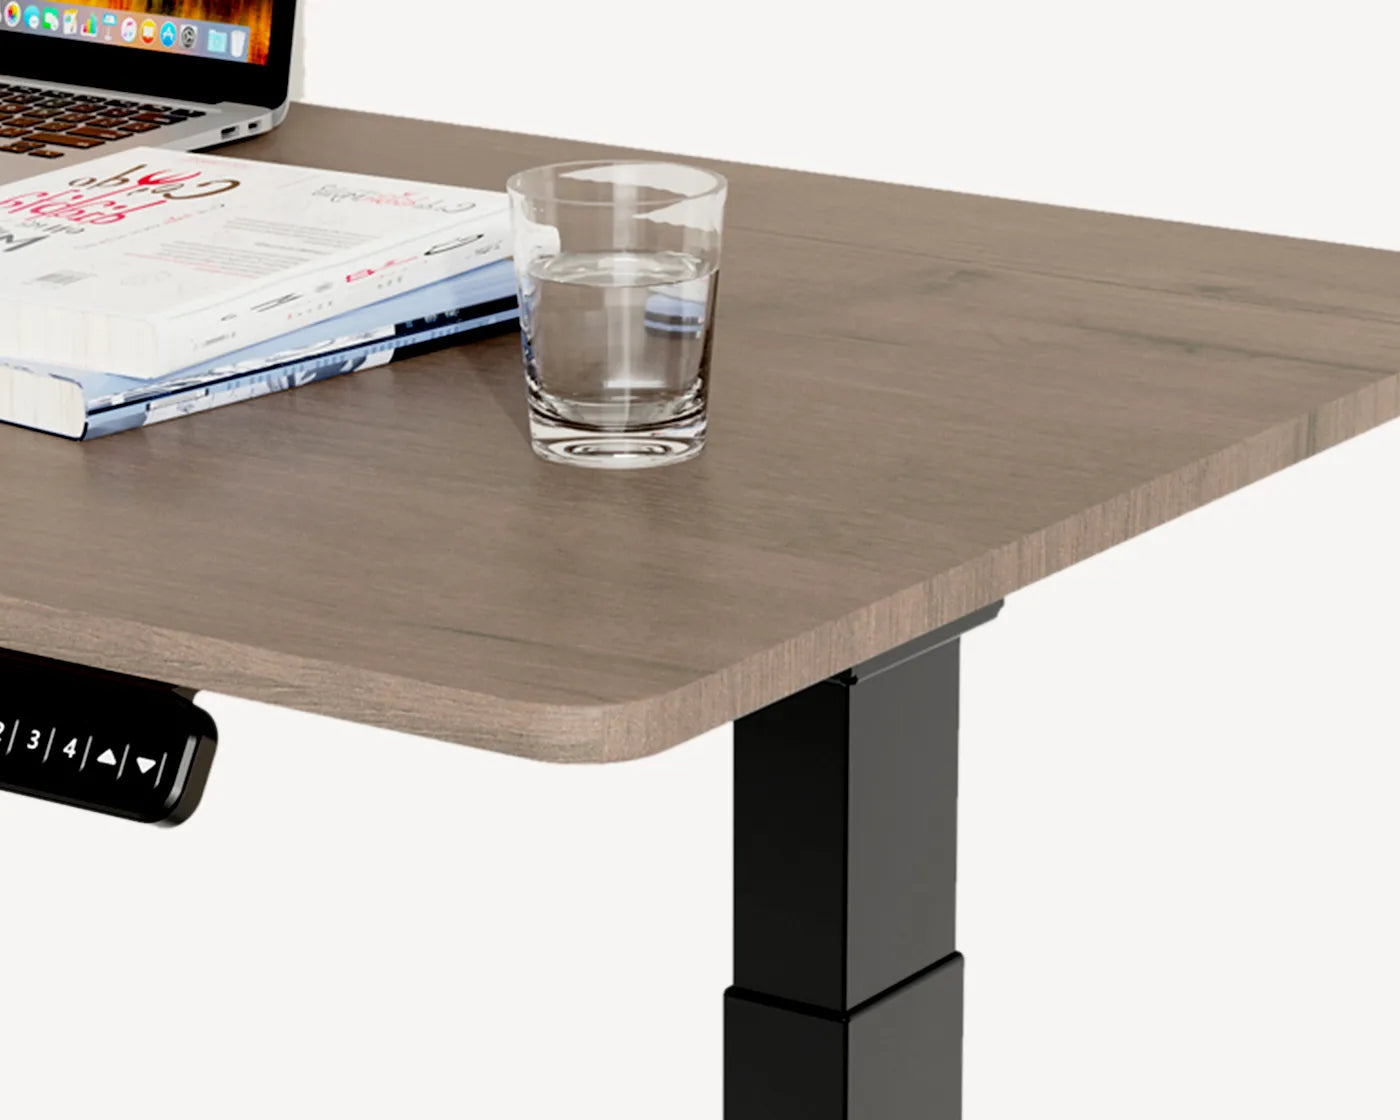 Flujo SmartAxle Standing Desk with anti-collision safety system for secure height adjustment.